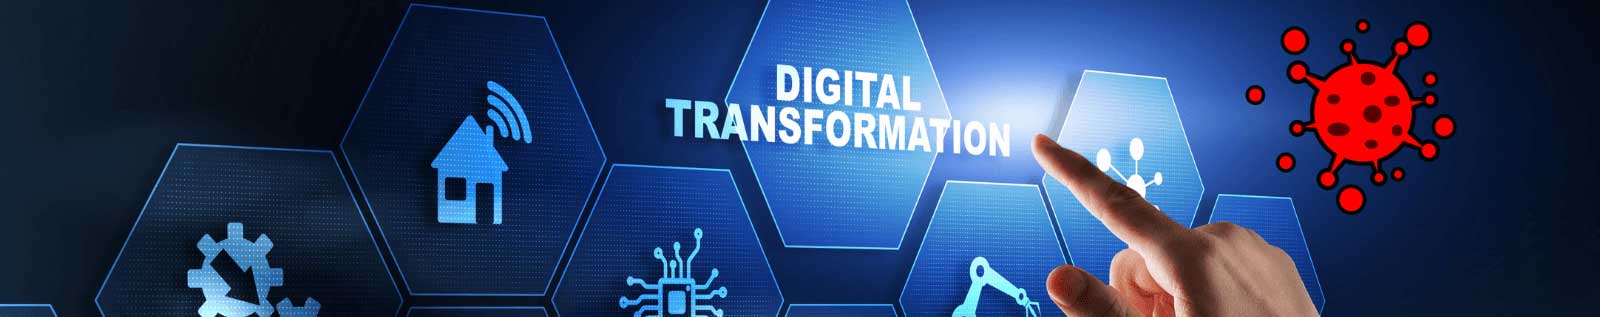 How COVID 19 Has Accelerated The Digital Transformation Of Industries